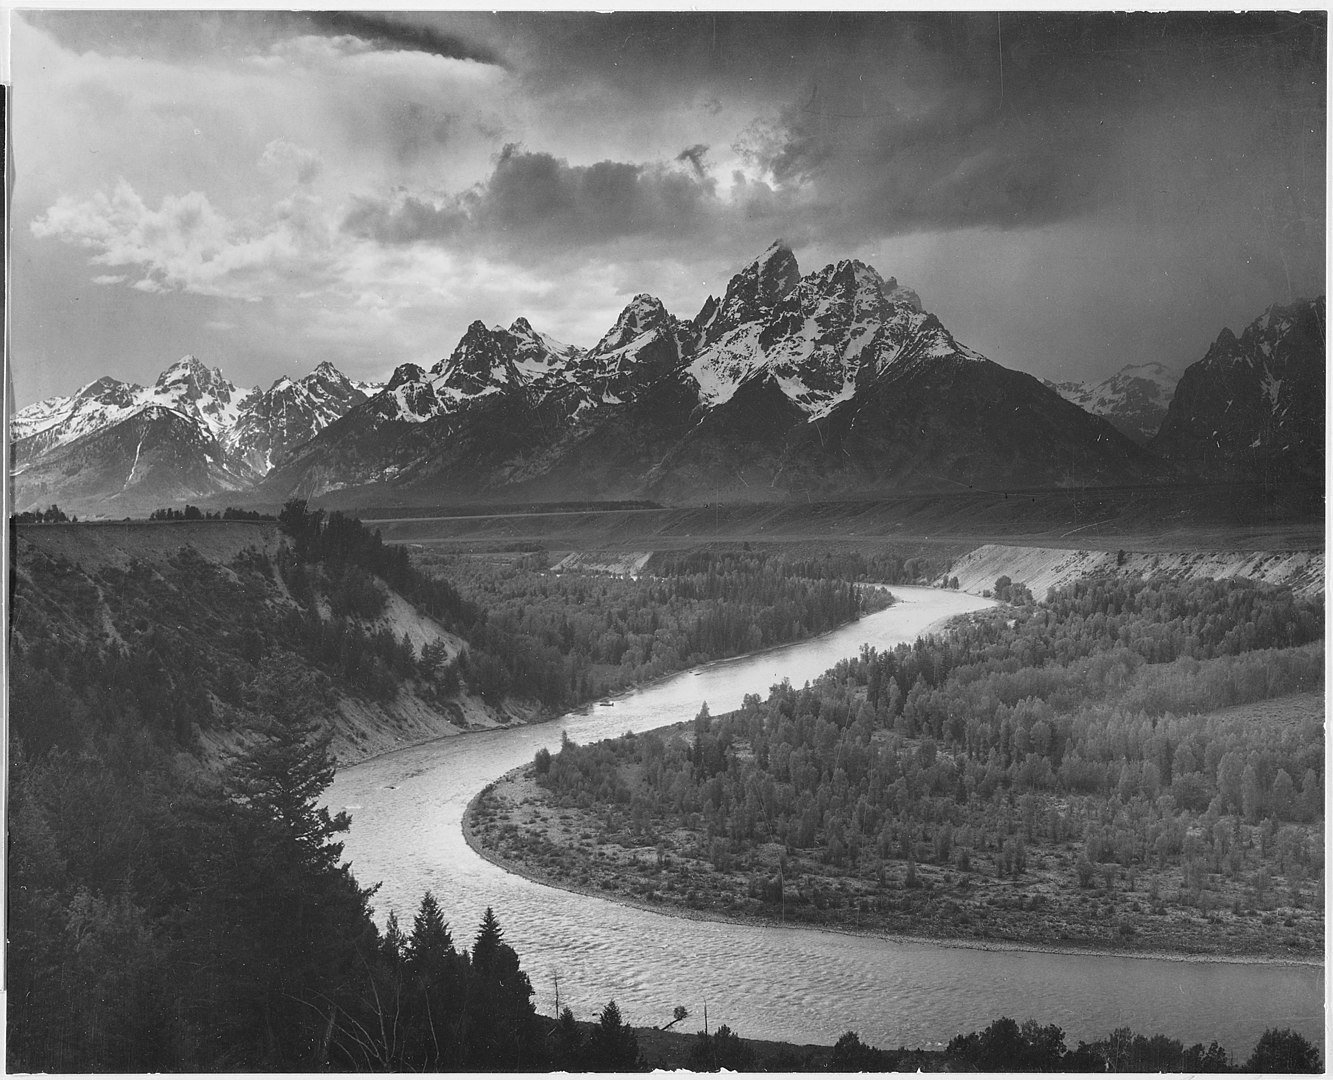 A Brief History of Landscape Photography